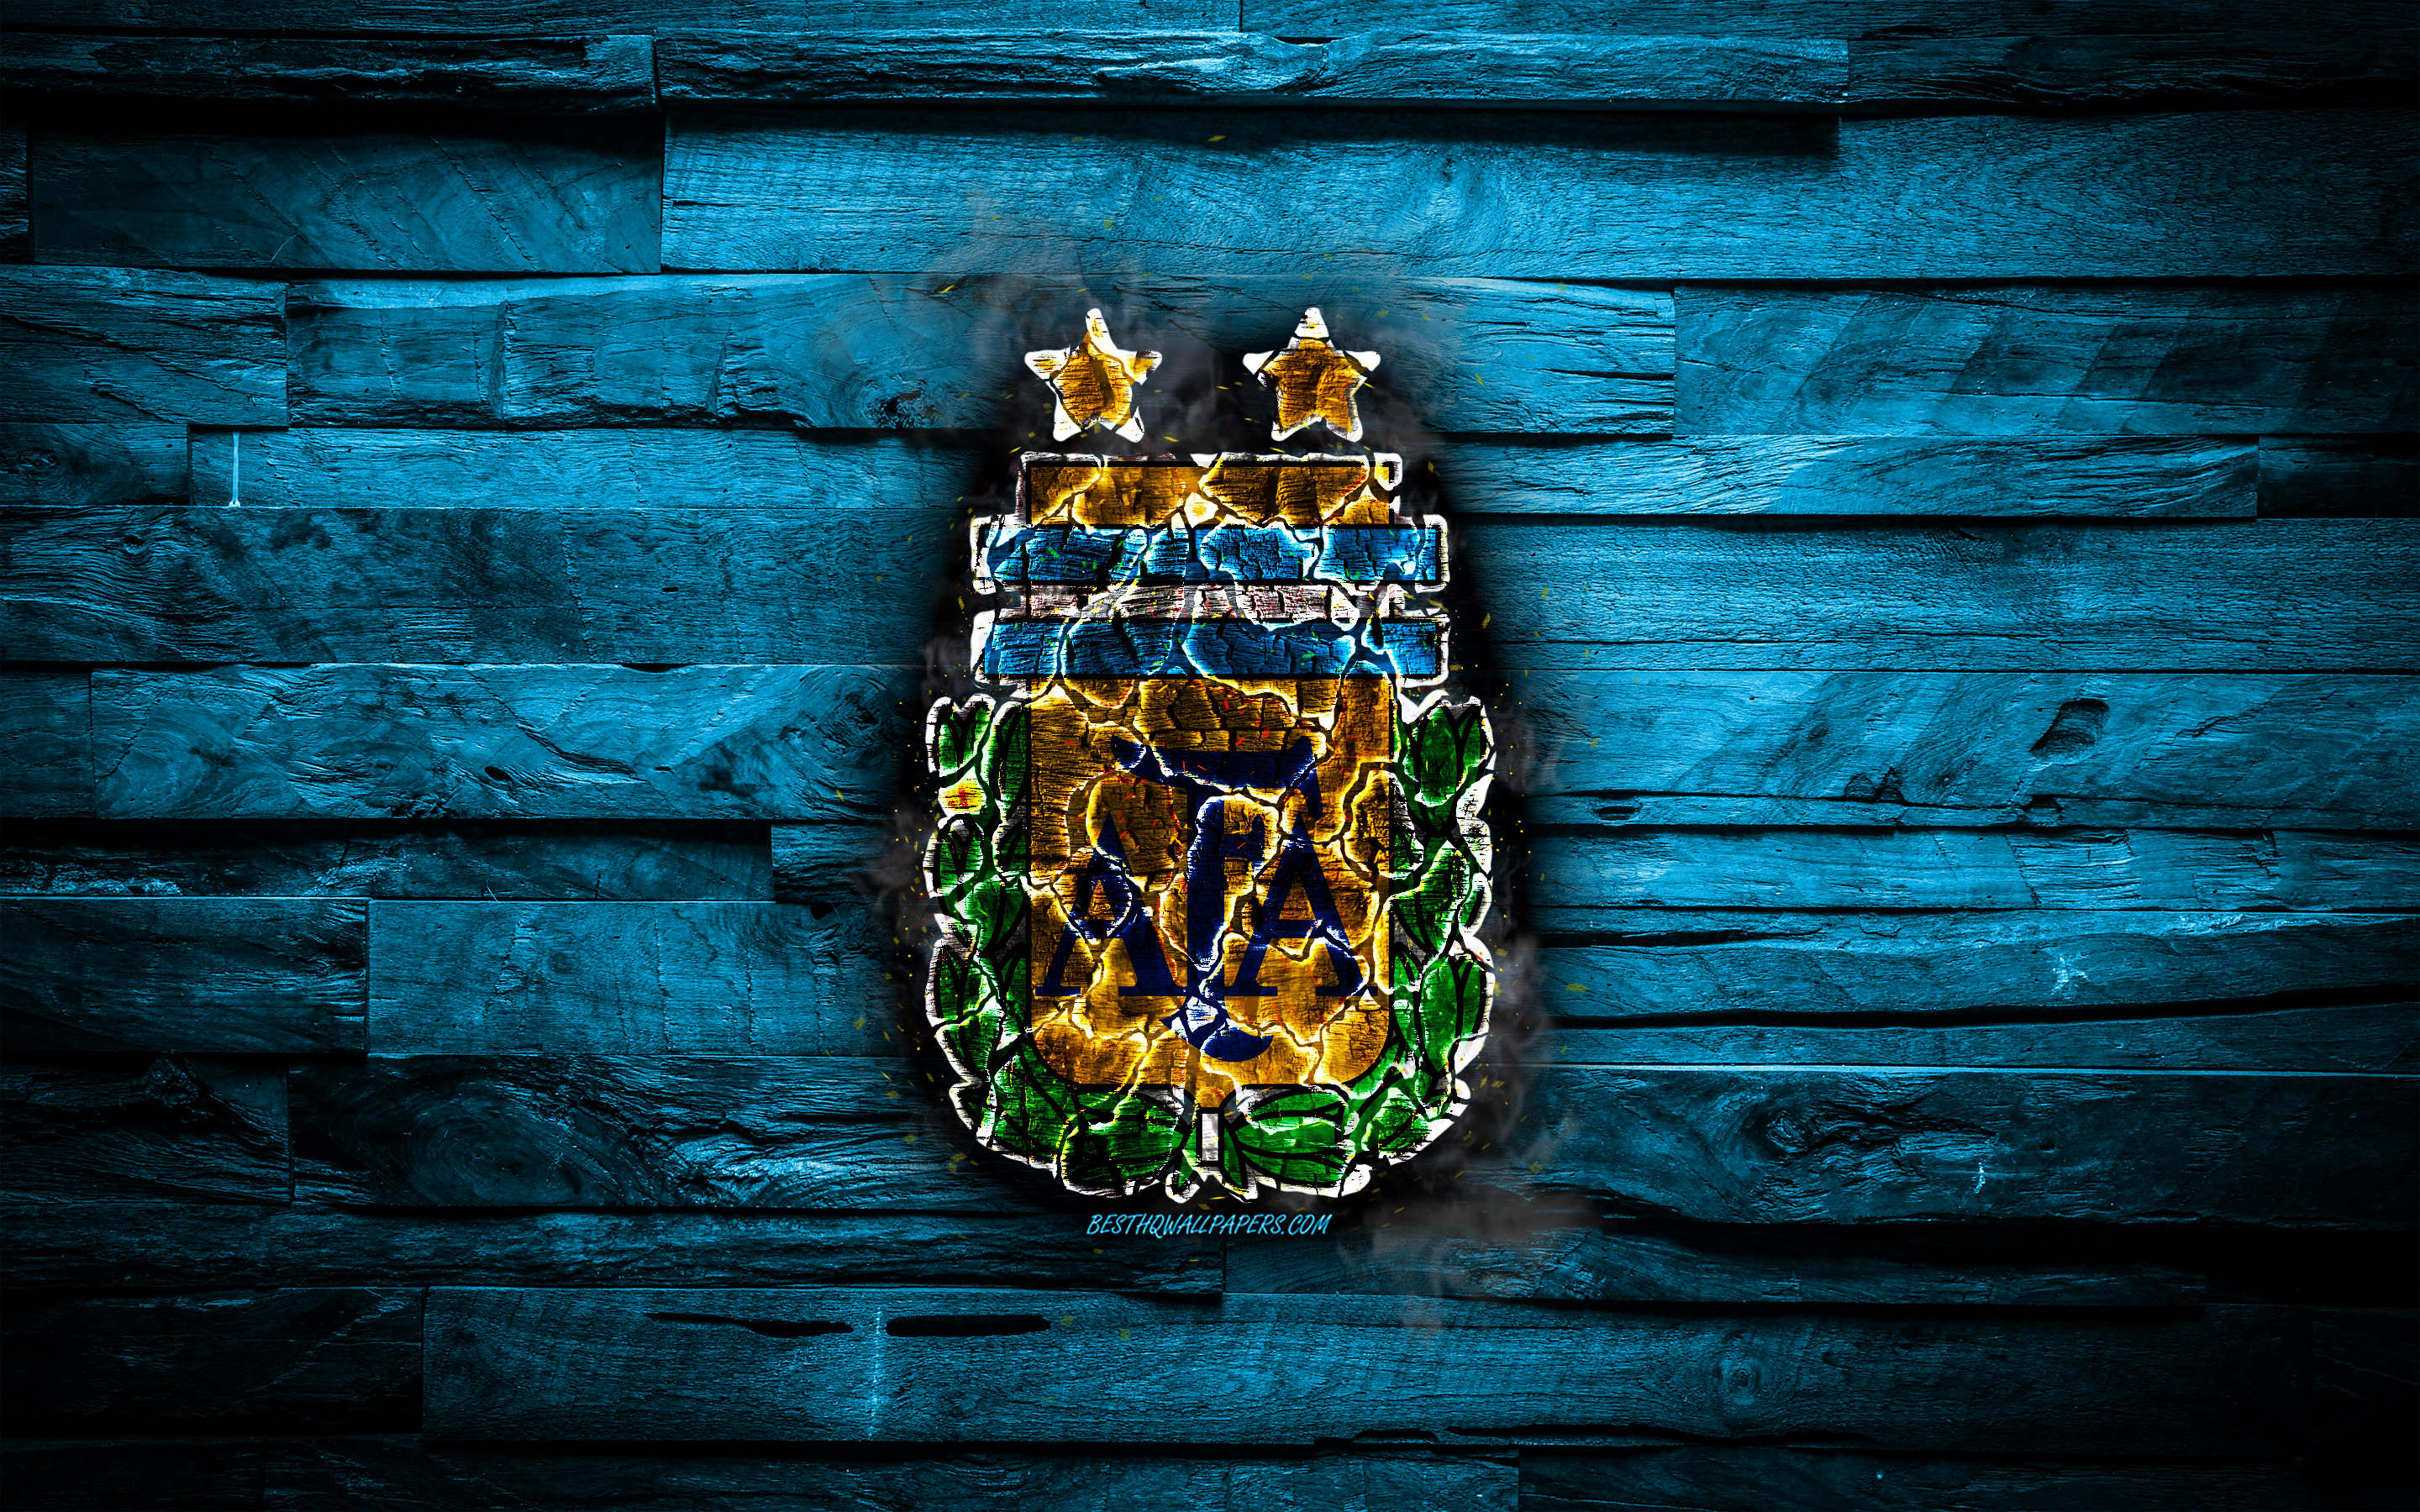 Download wallpapers Argentina, burning logo, Conmebol, blue wooden  background, grunge, South America National Teams, football, Argentinean  soccer team, soccer, Argentina national football team for desktop with  resolution 2880x1800. High Quality HD pictures